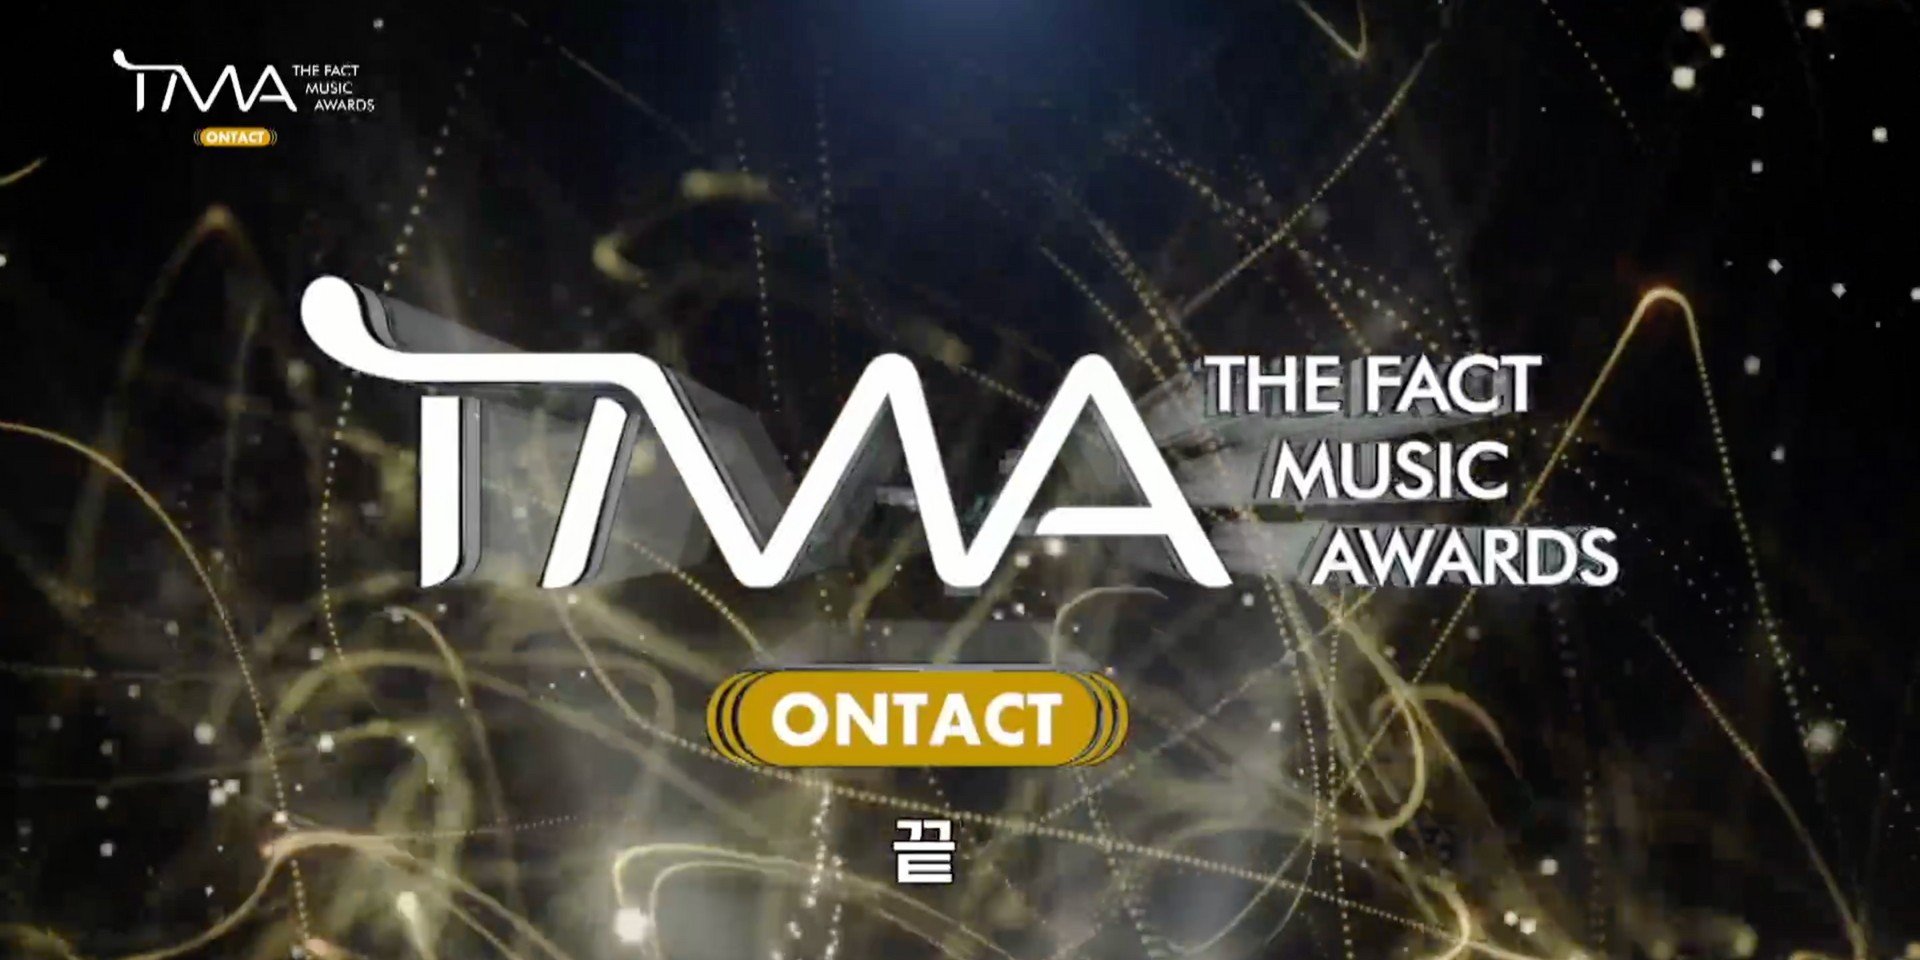 BTS, SUPER JUNIOR, MAMAMOO, TWICE, ITZY, and more win at the 2020 Fact Music Awards – see the list of winners